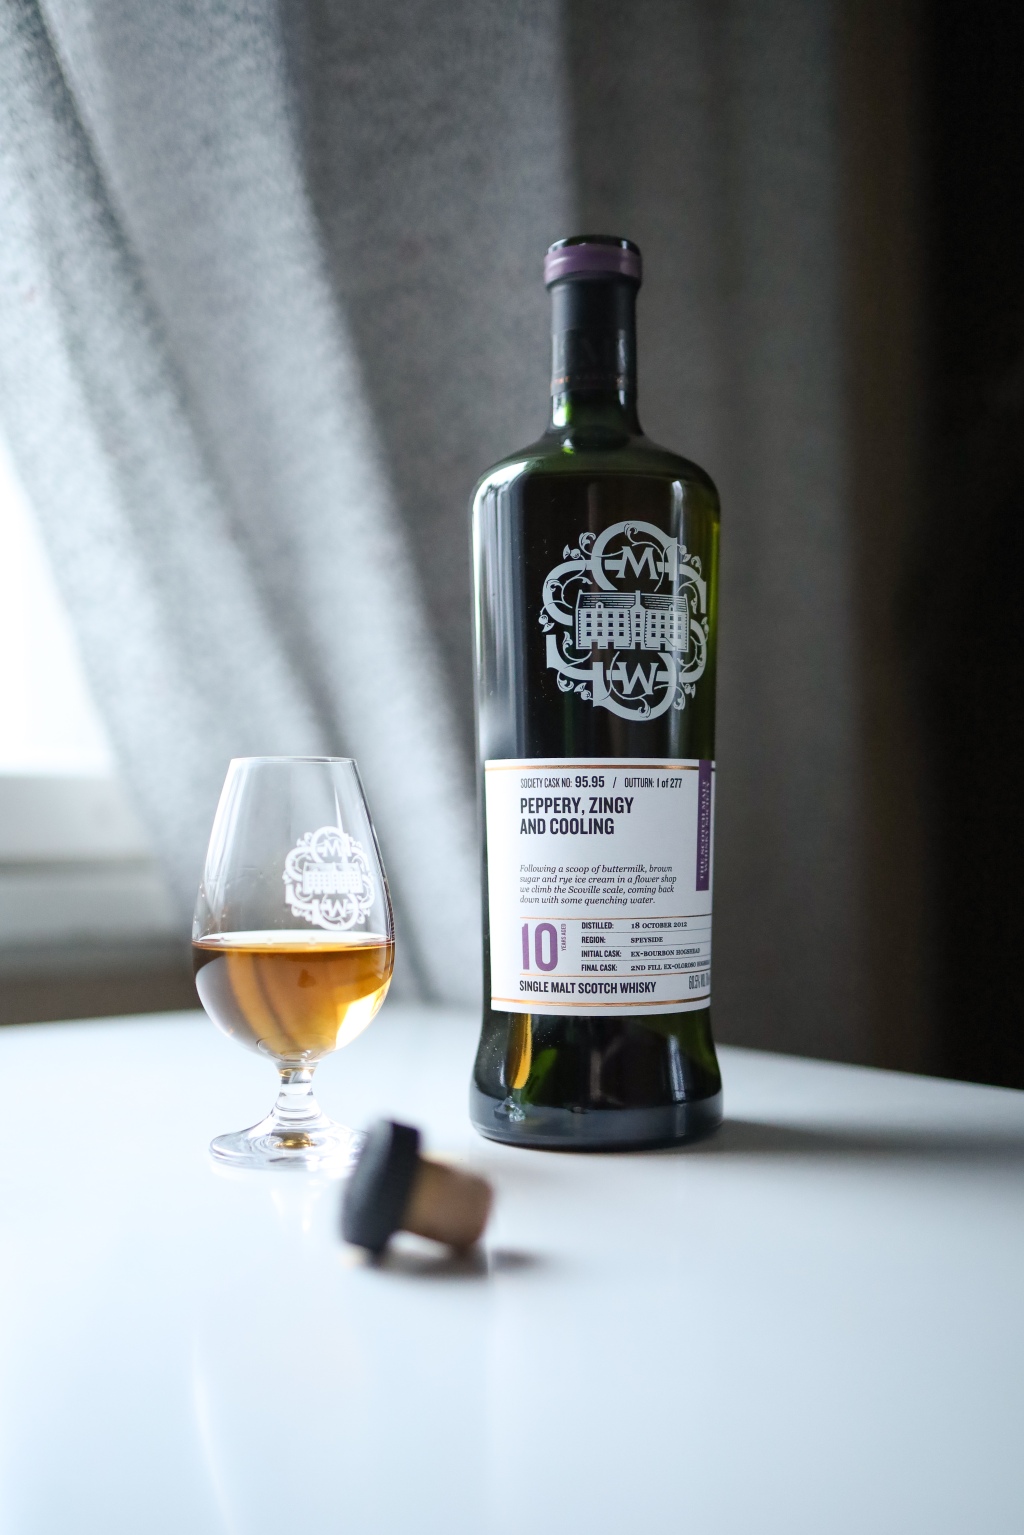 SMWS Cask No. 95.95 Peppery, Zingy and Cooling